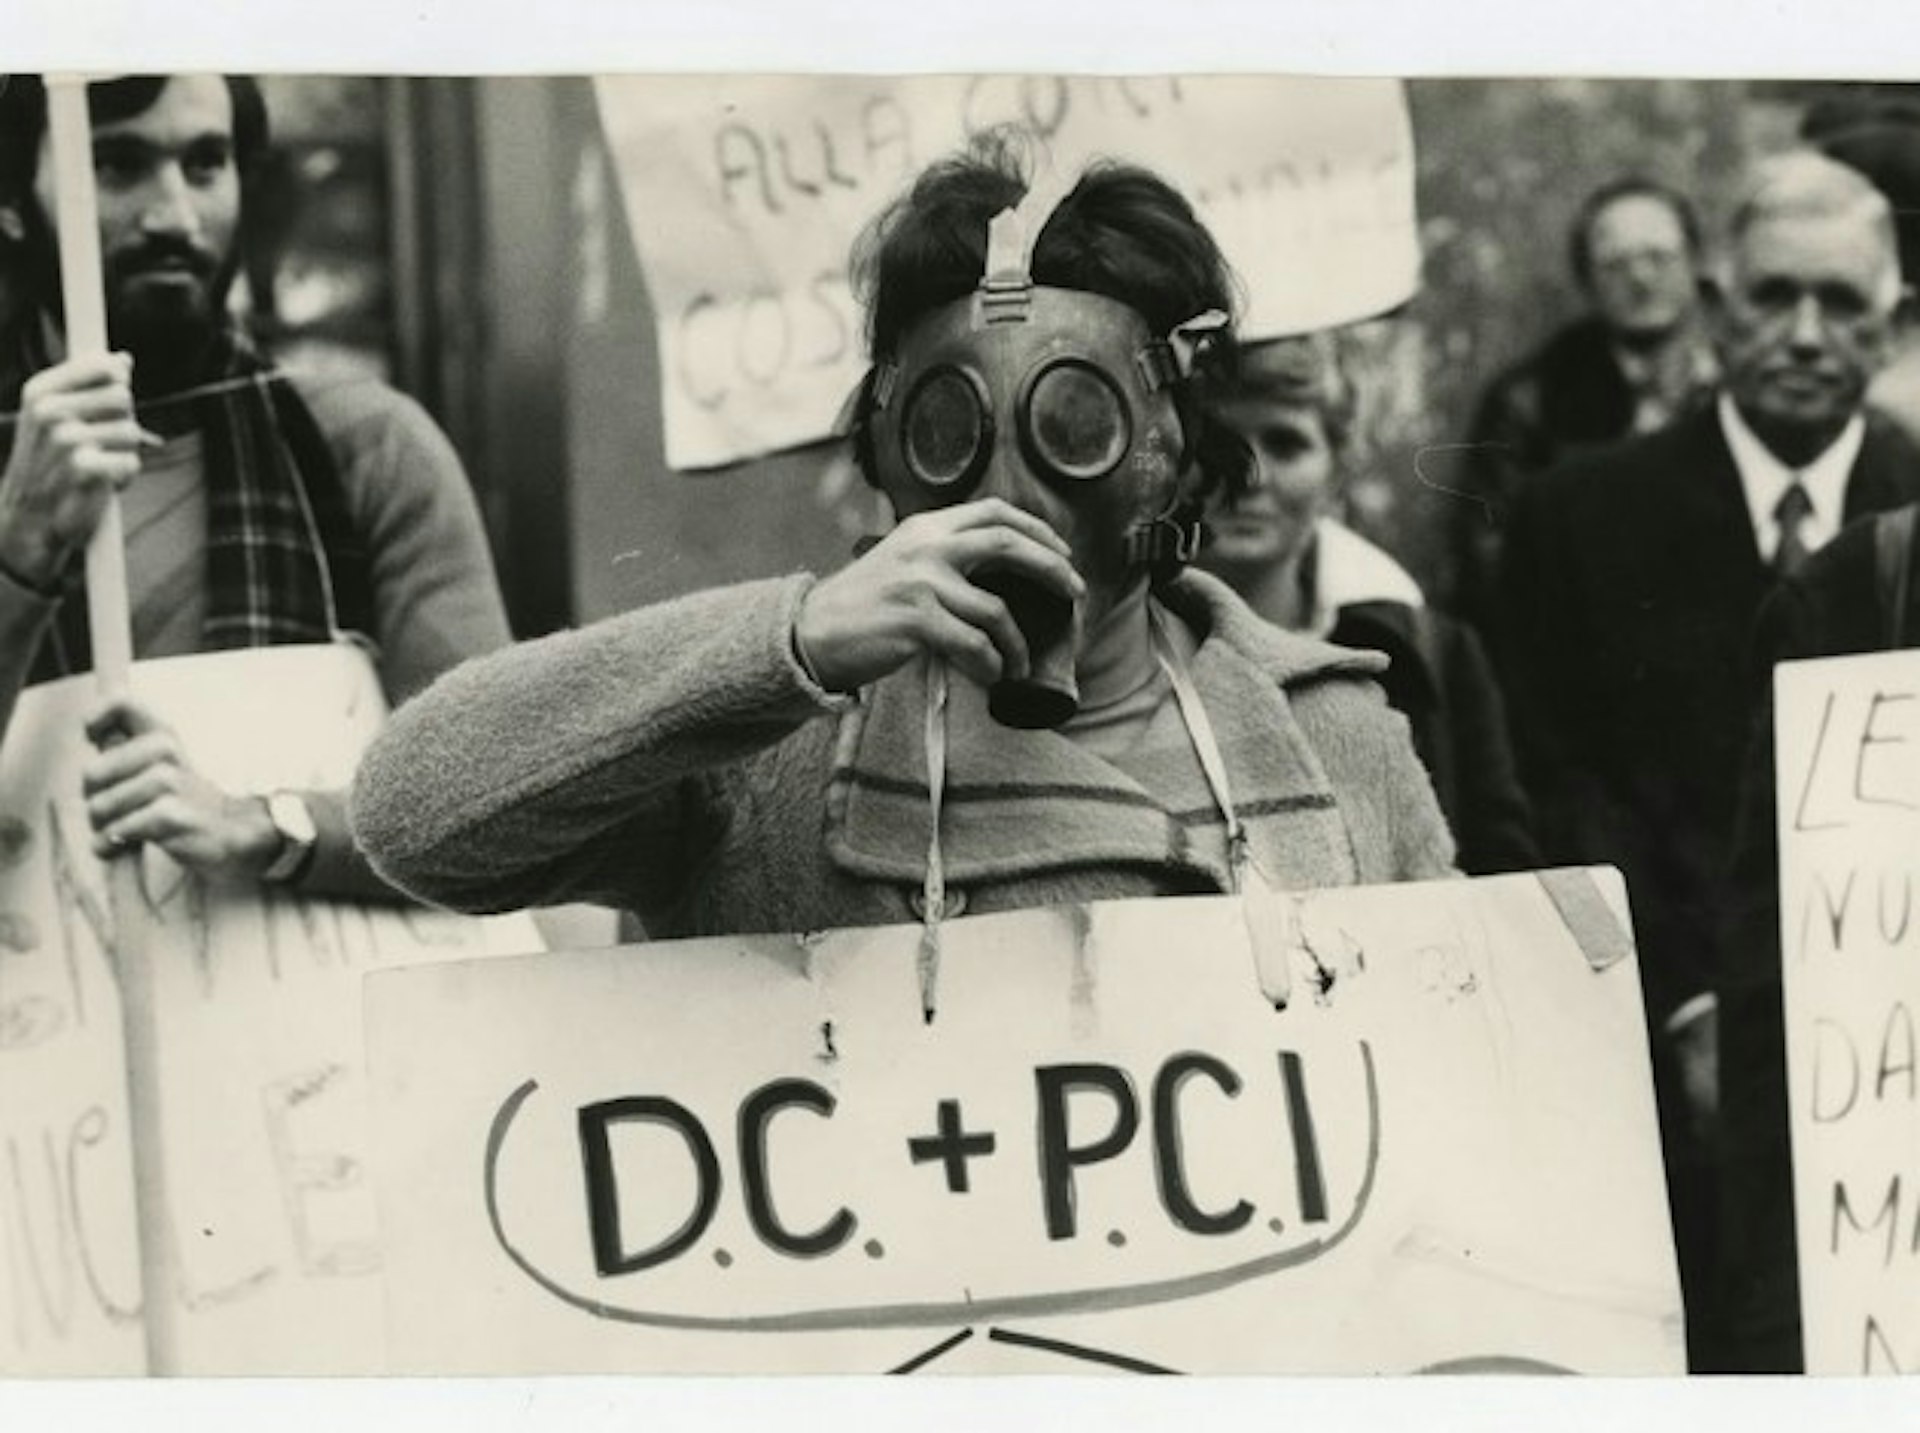 Demonstration against the Historic Compromise, alliance of the Christian Democracy (DC) and the Italian Communist Party (PCI), Rome, 1970s © Team Editorial Services/Alinari